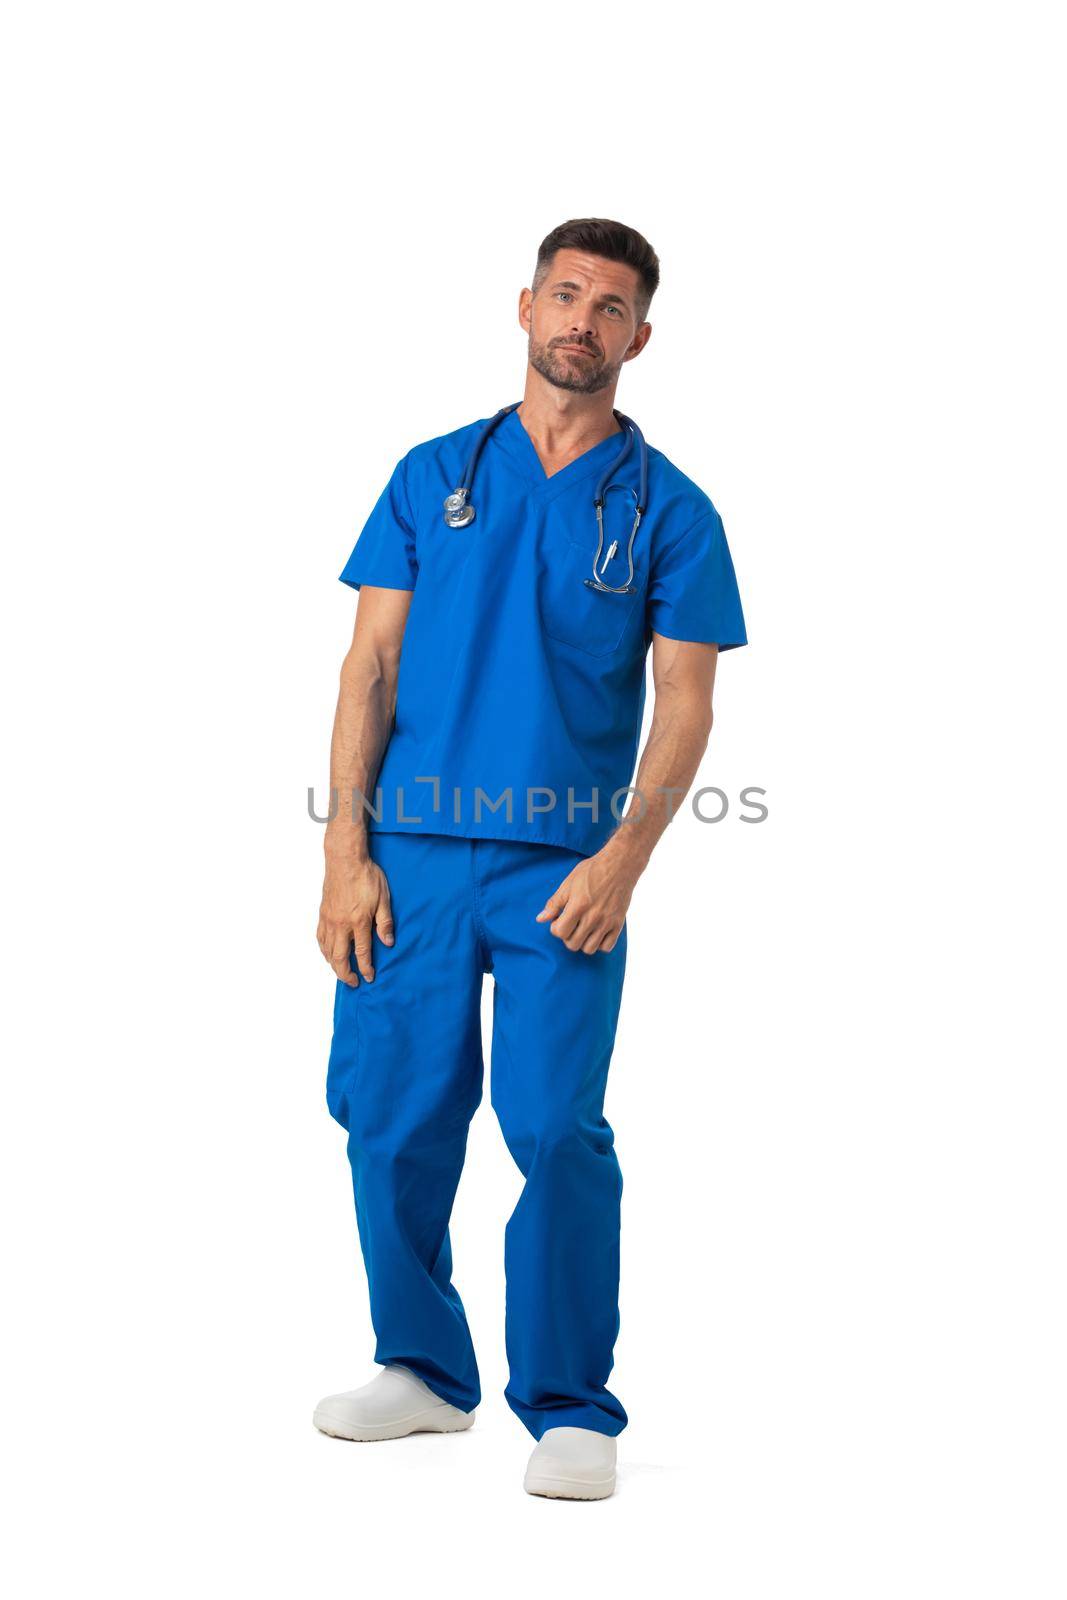 Tired sleepy doctor standing in medical clothing with eyes closed full length portrait isolated on white background